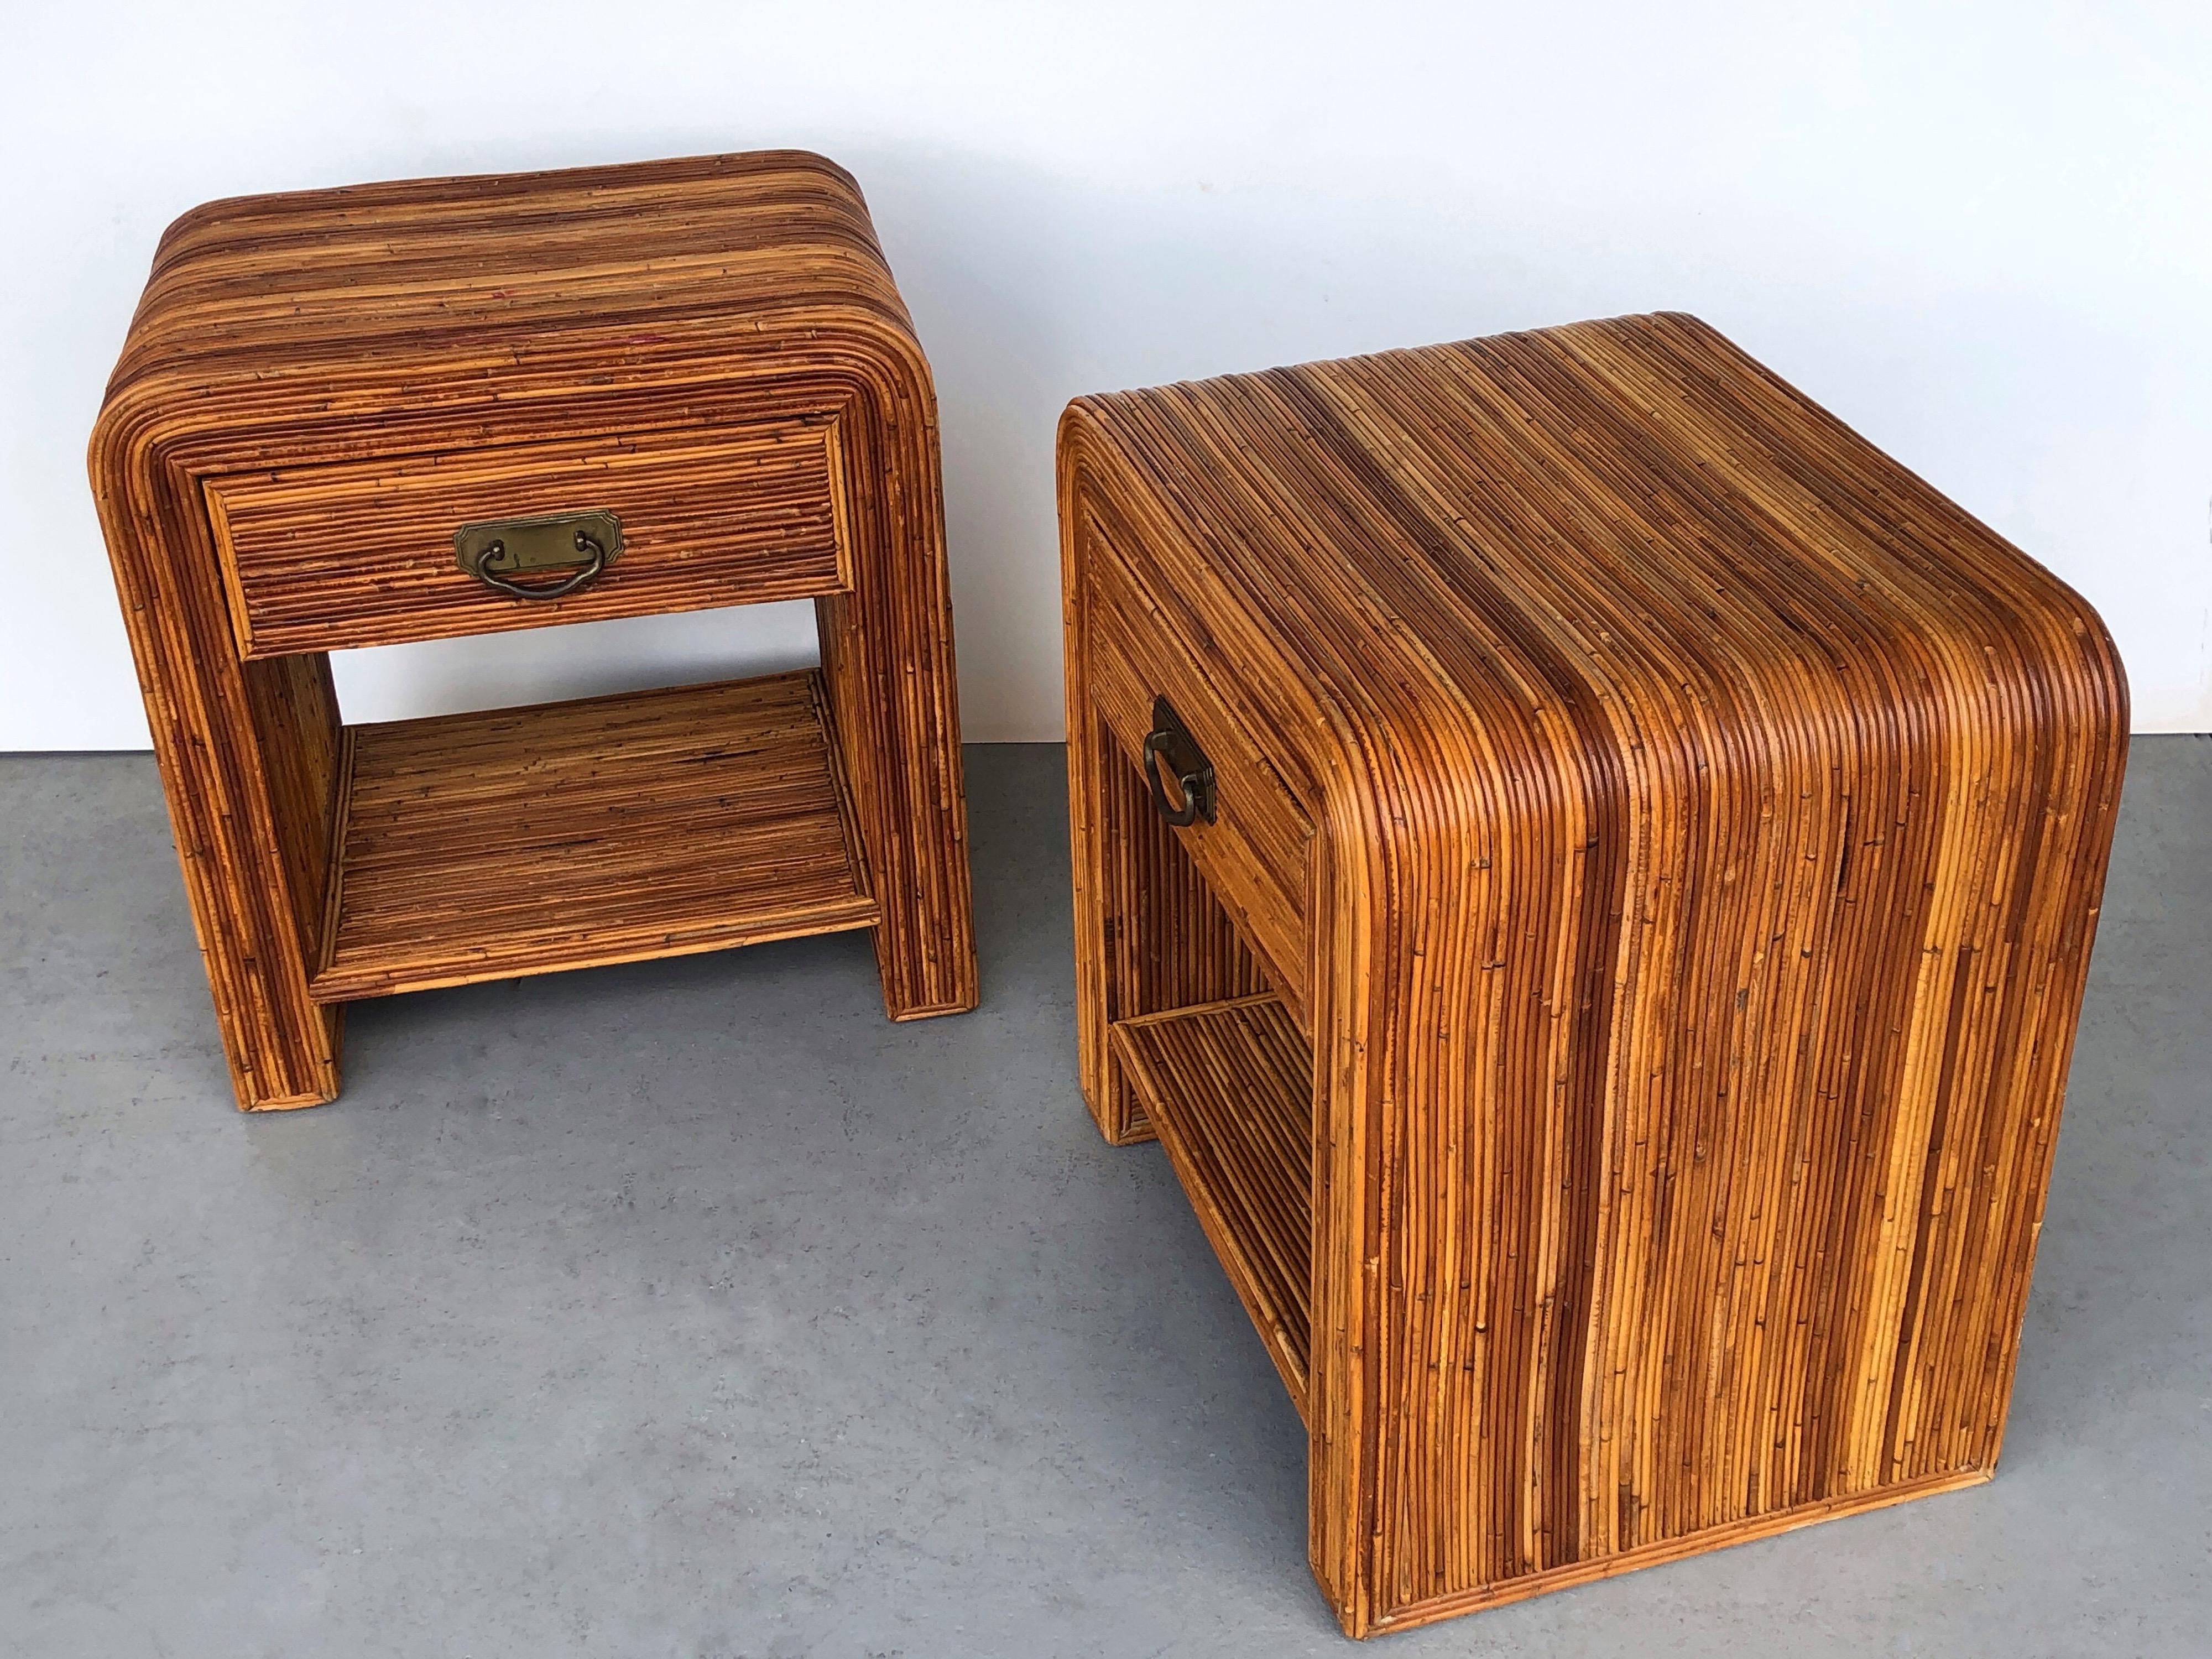 A pair of side tables in pencil rattan. Waterfall design with brass pulls. Finished in all sides.